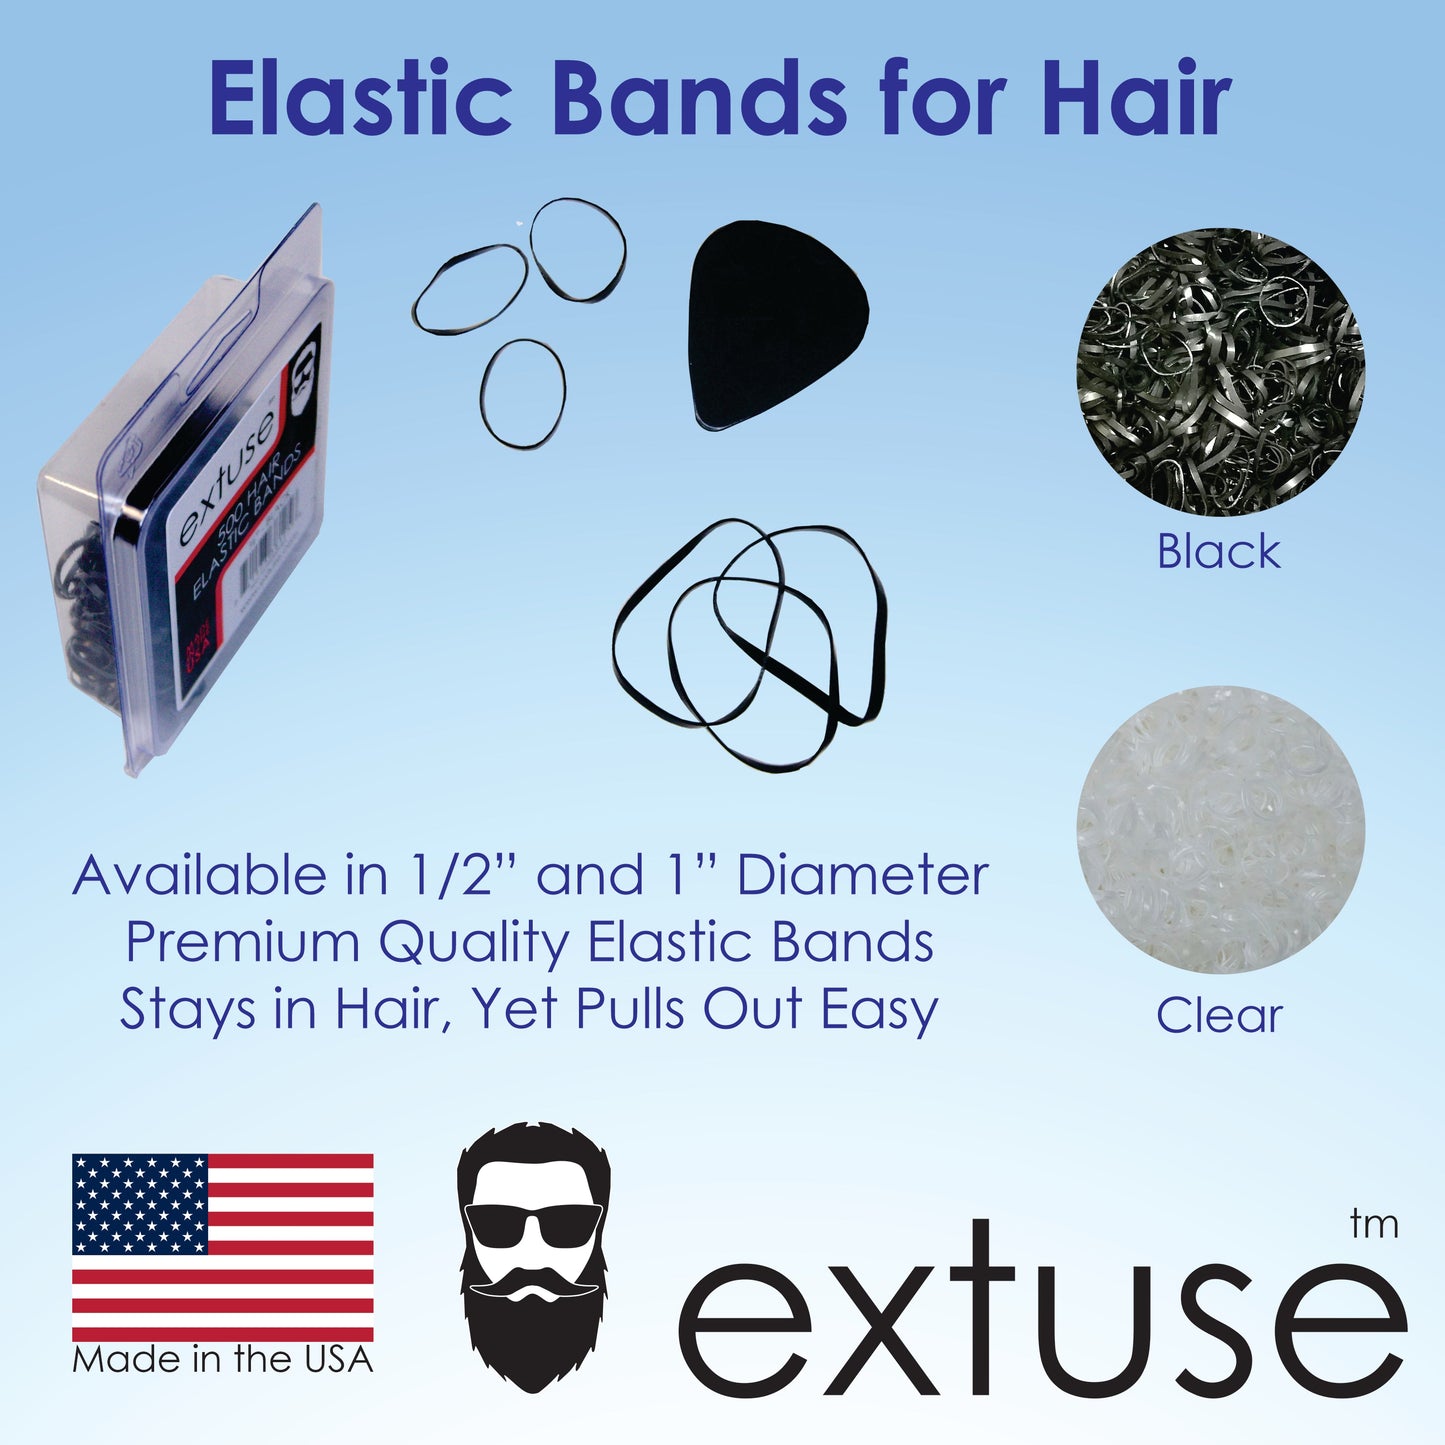 Extuse | 1/2in, Black, Tangle Free Elastic Pony Tail Holders | Made in USA, Ideal for Beards, Braids, Twists and Ponytails. For All People. Pain Free, Snag Free, Easy Off | 500 Pack